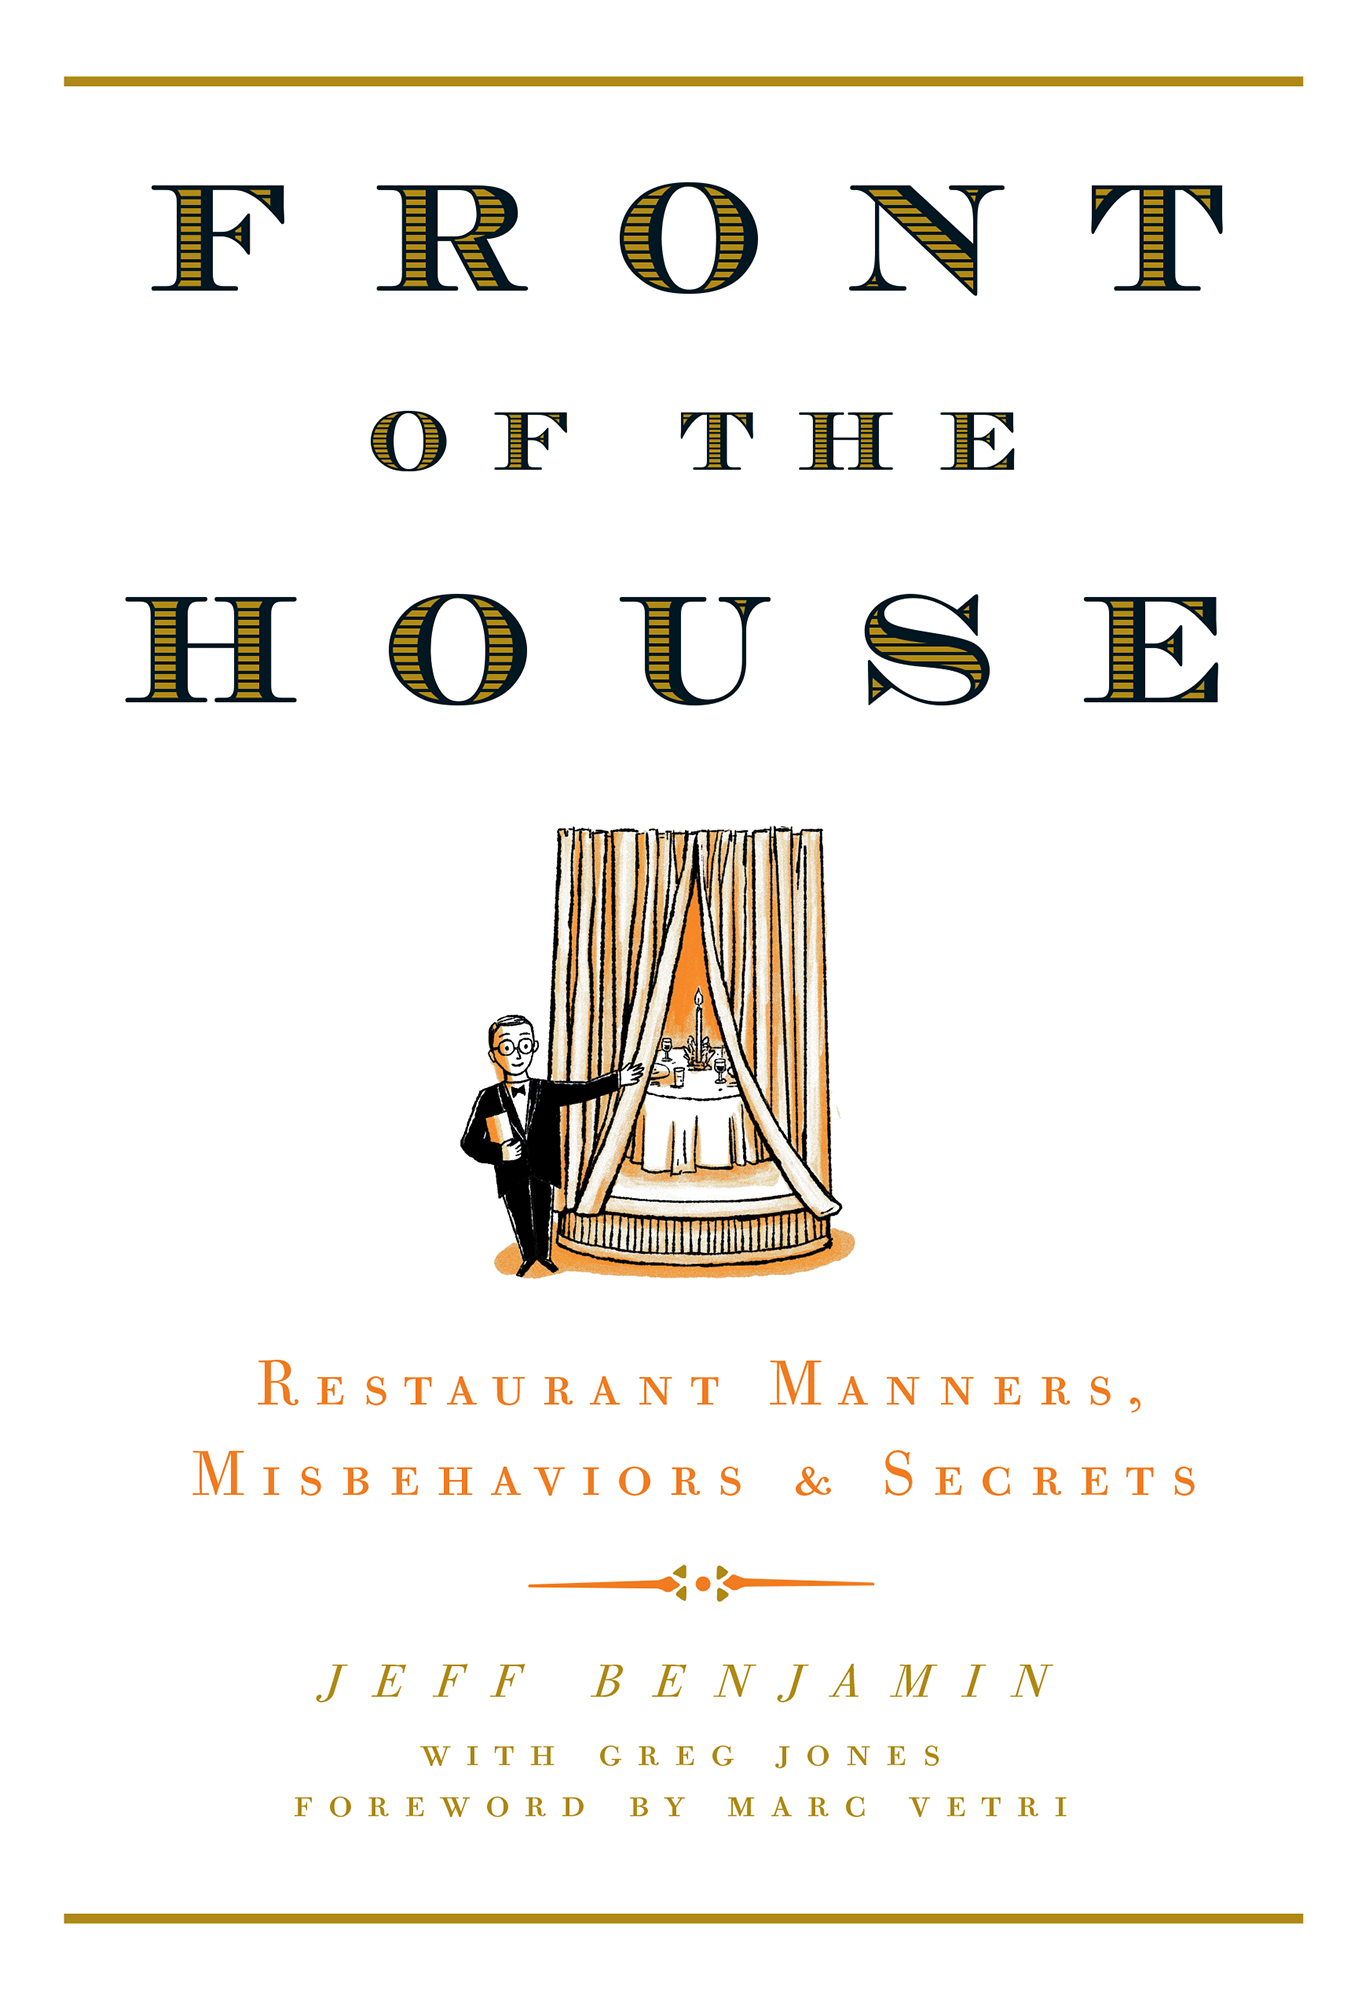 Front of the house restaurant manners misbehaviors and secrets - image 1